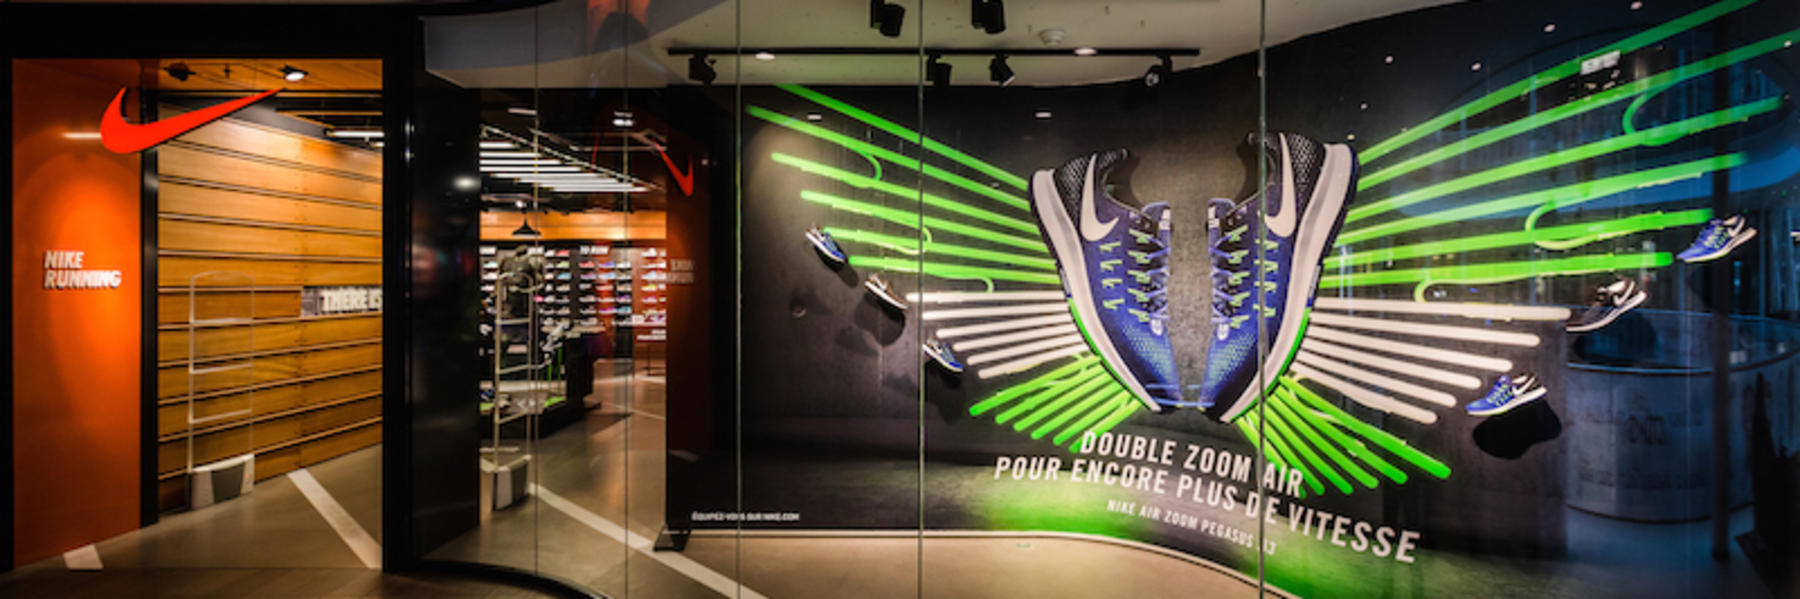 boutique nike beaugrenelle